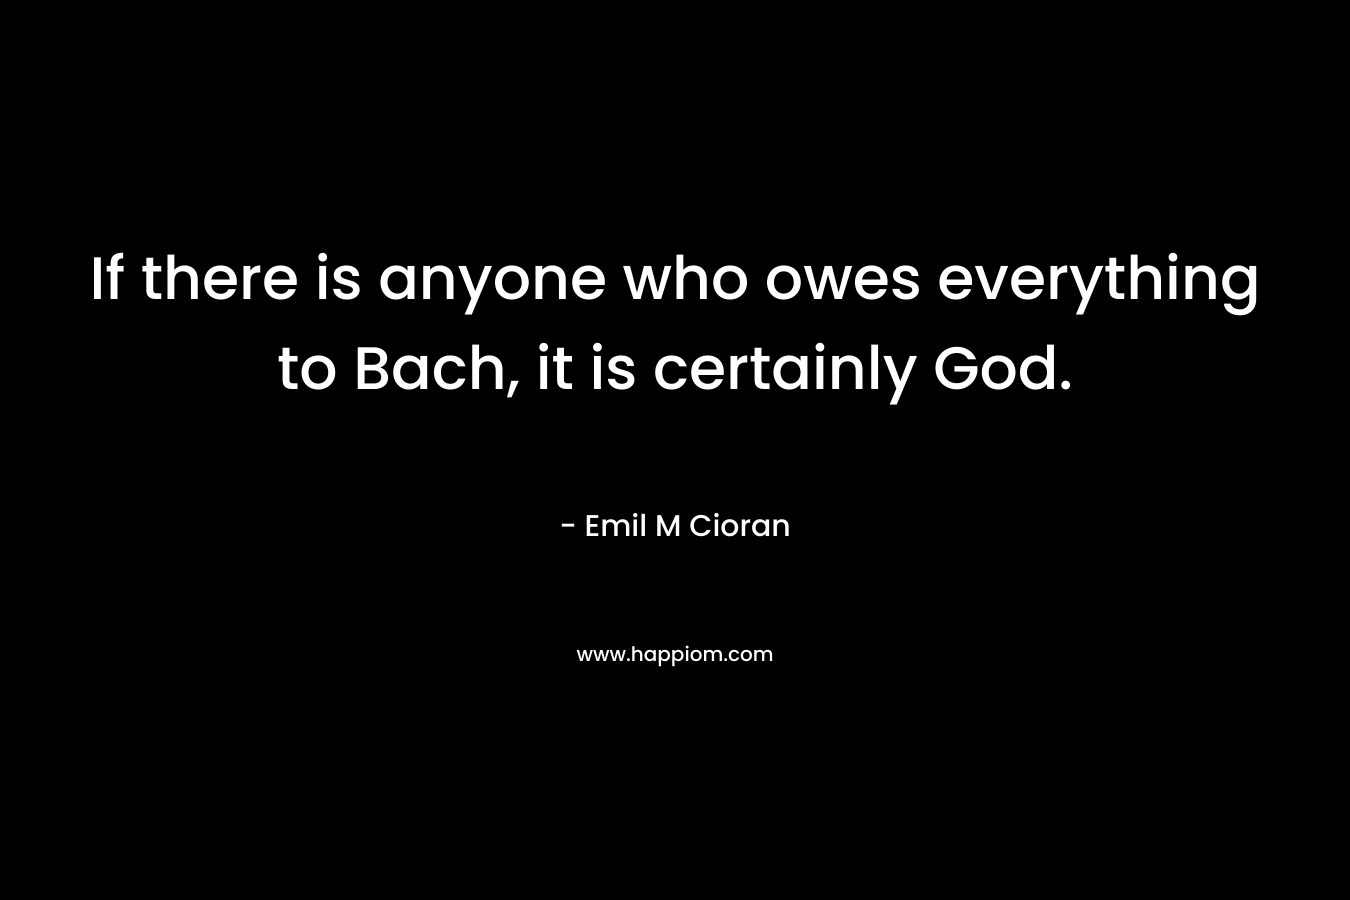 If there is anyone who owes everything to Bach, it is certainly God. – Emil M Cioran